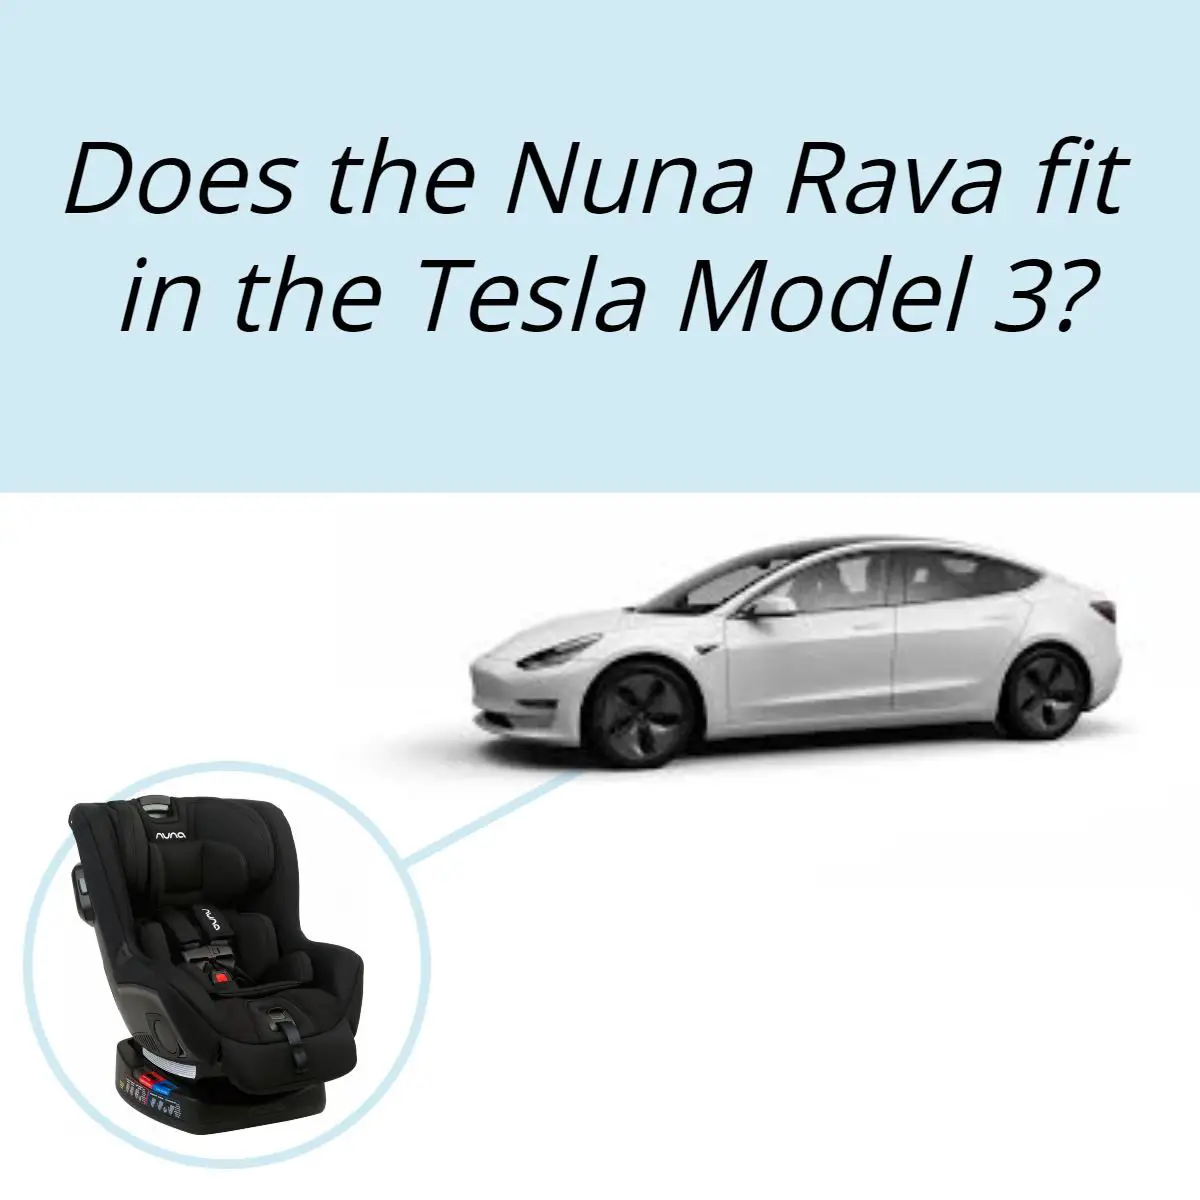 Does the Nuna Rava fit in the Tesla Model 3?